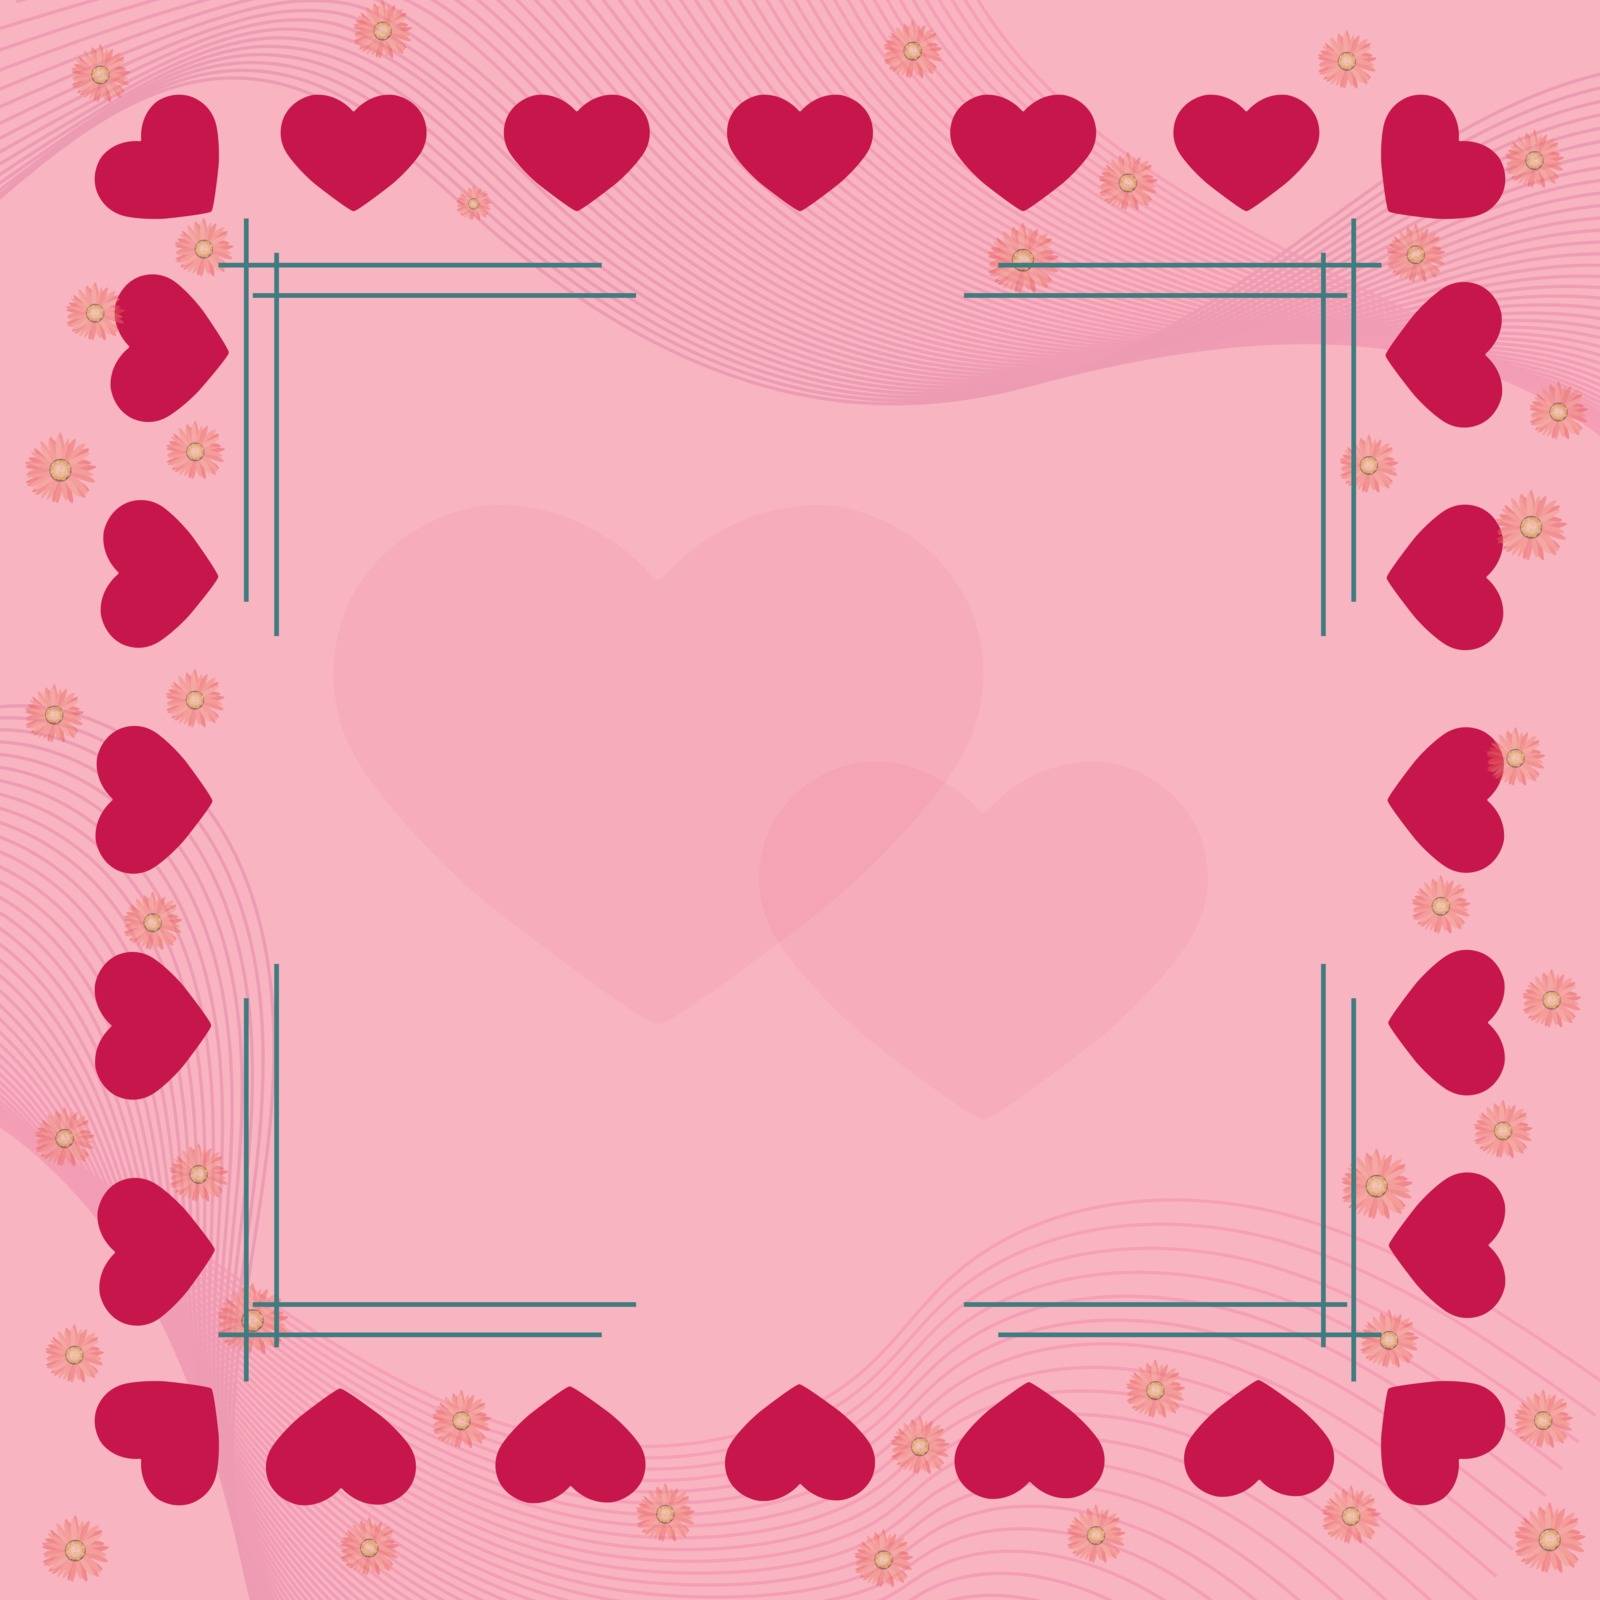 Pink heart and flowers on the borders of pink background with frame and heart in the middle. Ideal solution for design and decoration of greetings.